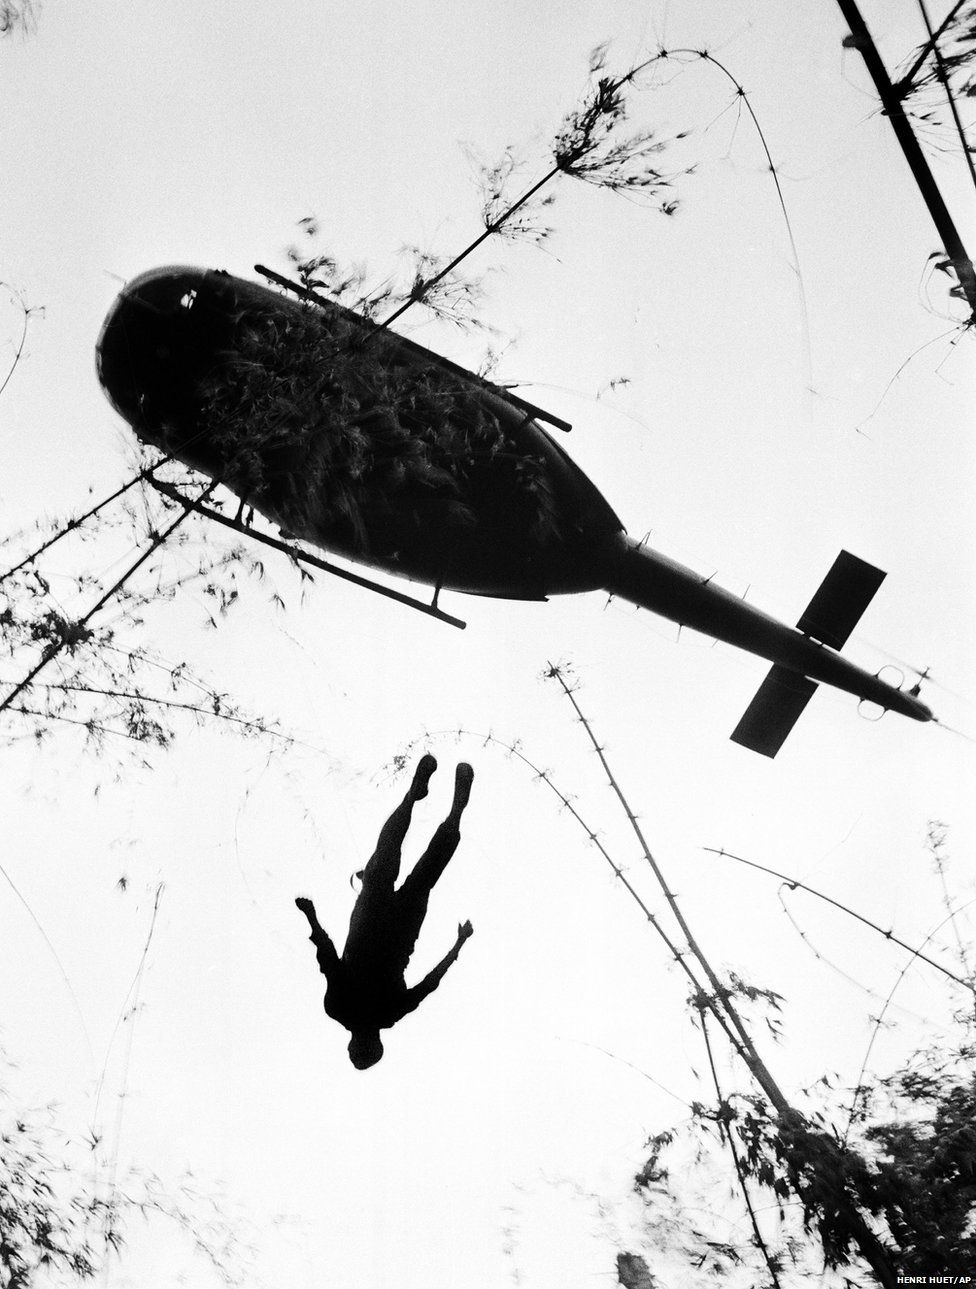 The body of an American paratrooper killed in action in the jungle near the Cambodian border is raised up to an evacuation helicopter in War Zone C, Vietnam, 14 May 1966